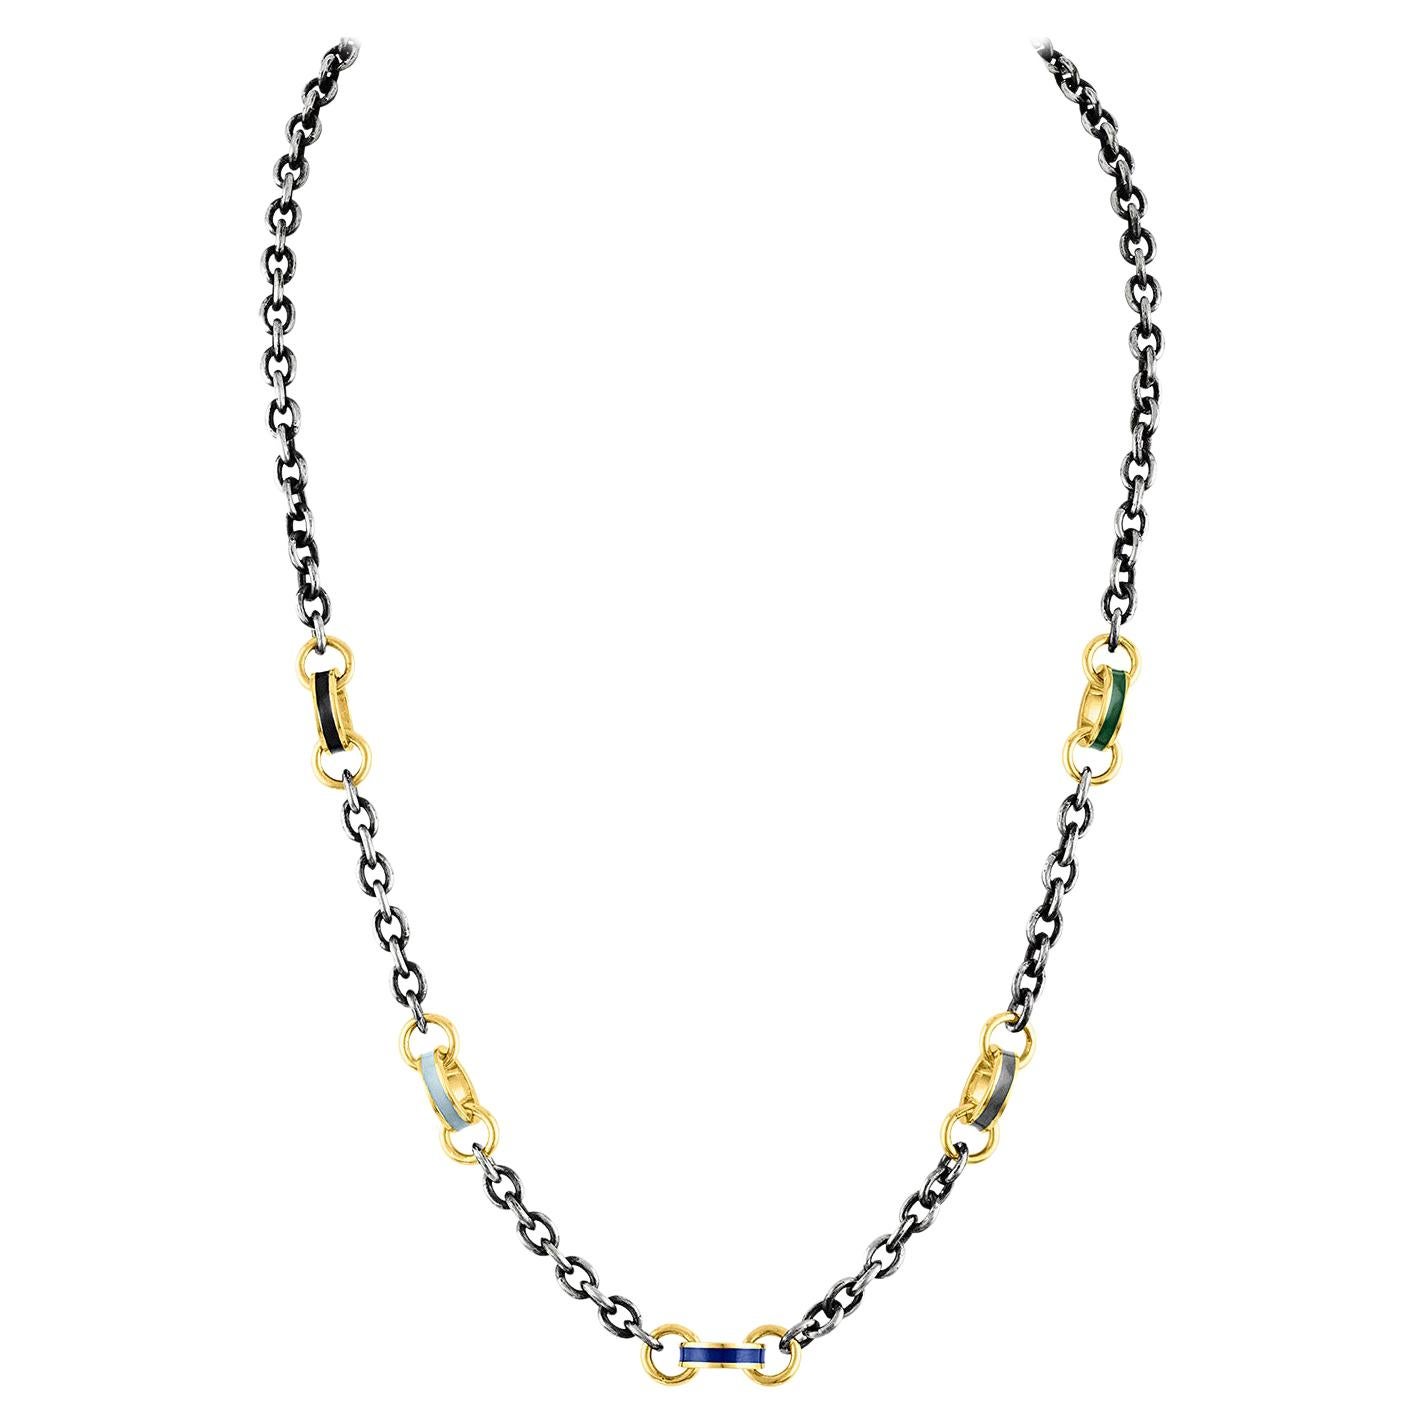 14 Karat and Oxidized Silver Chain with Gold and Enamel Links